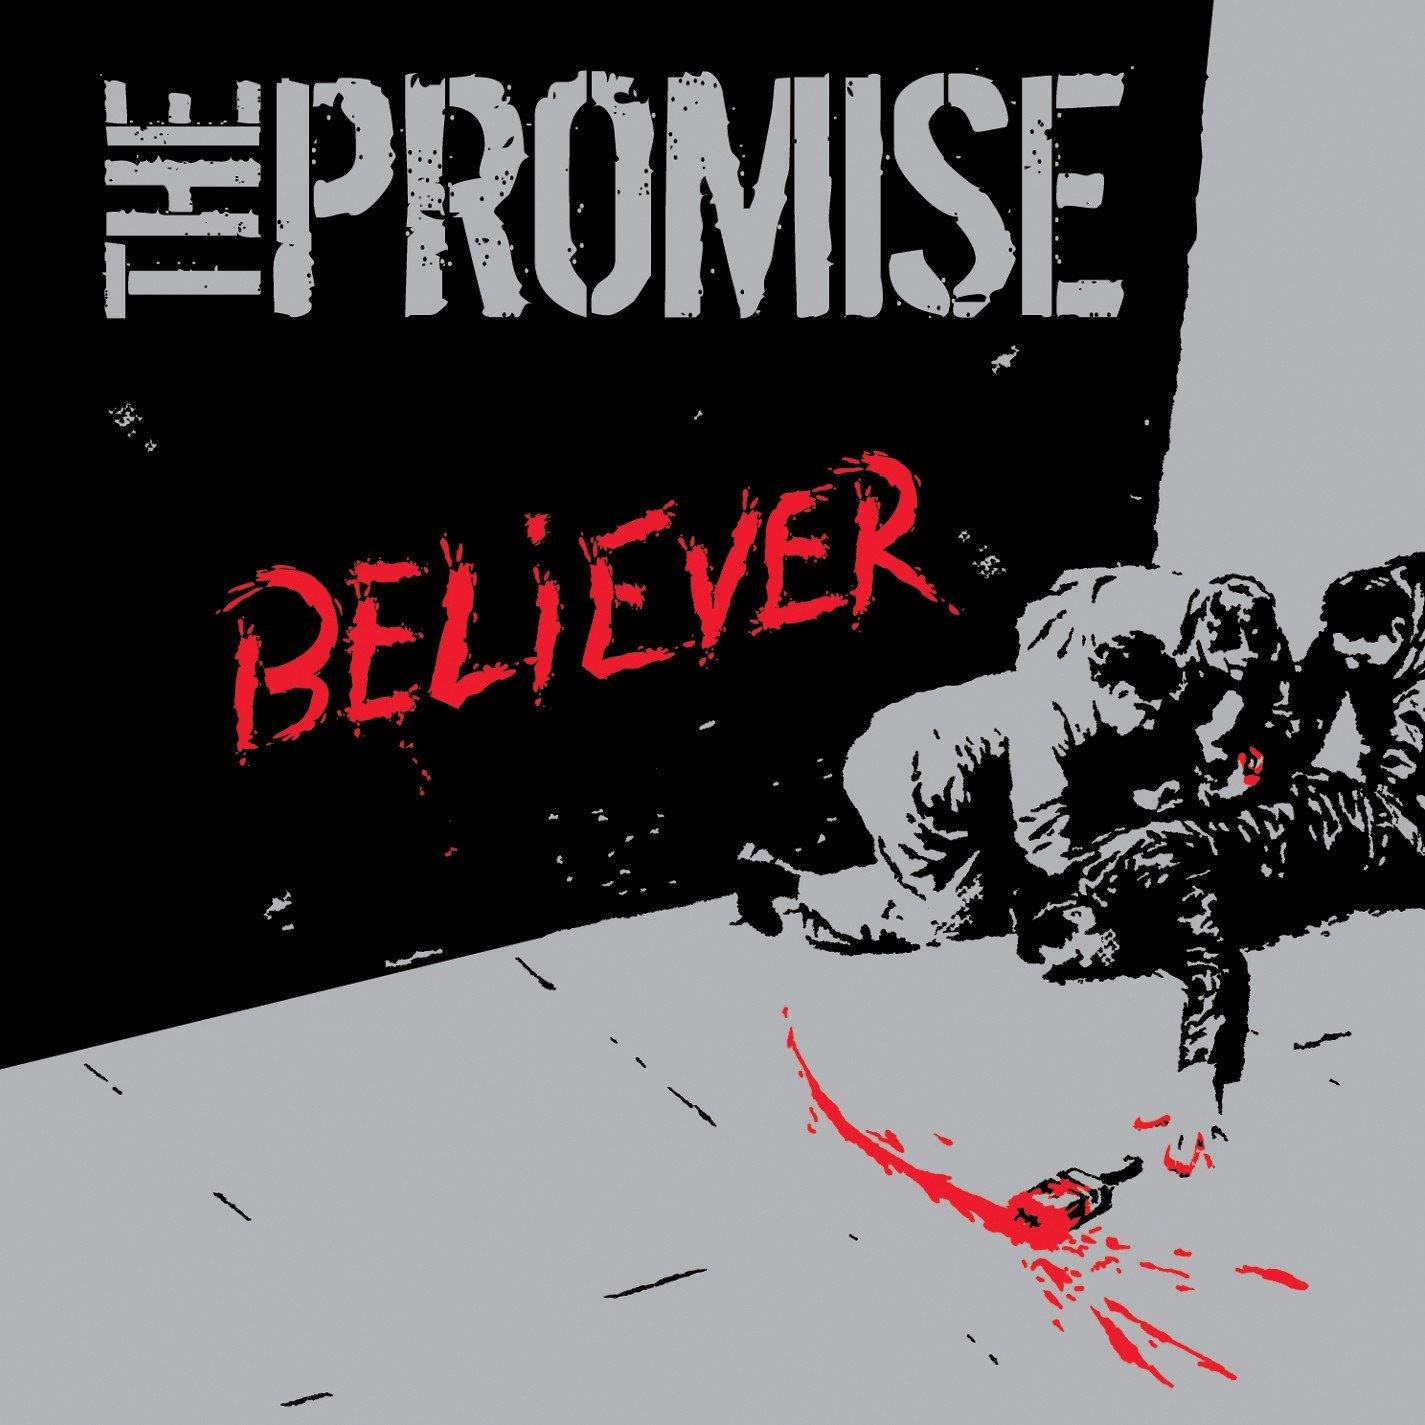 Buy – The Promise "Believer" CD – Band & Music Merch – Cold Cuts Merch